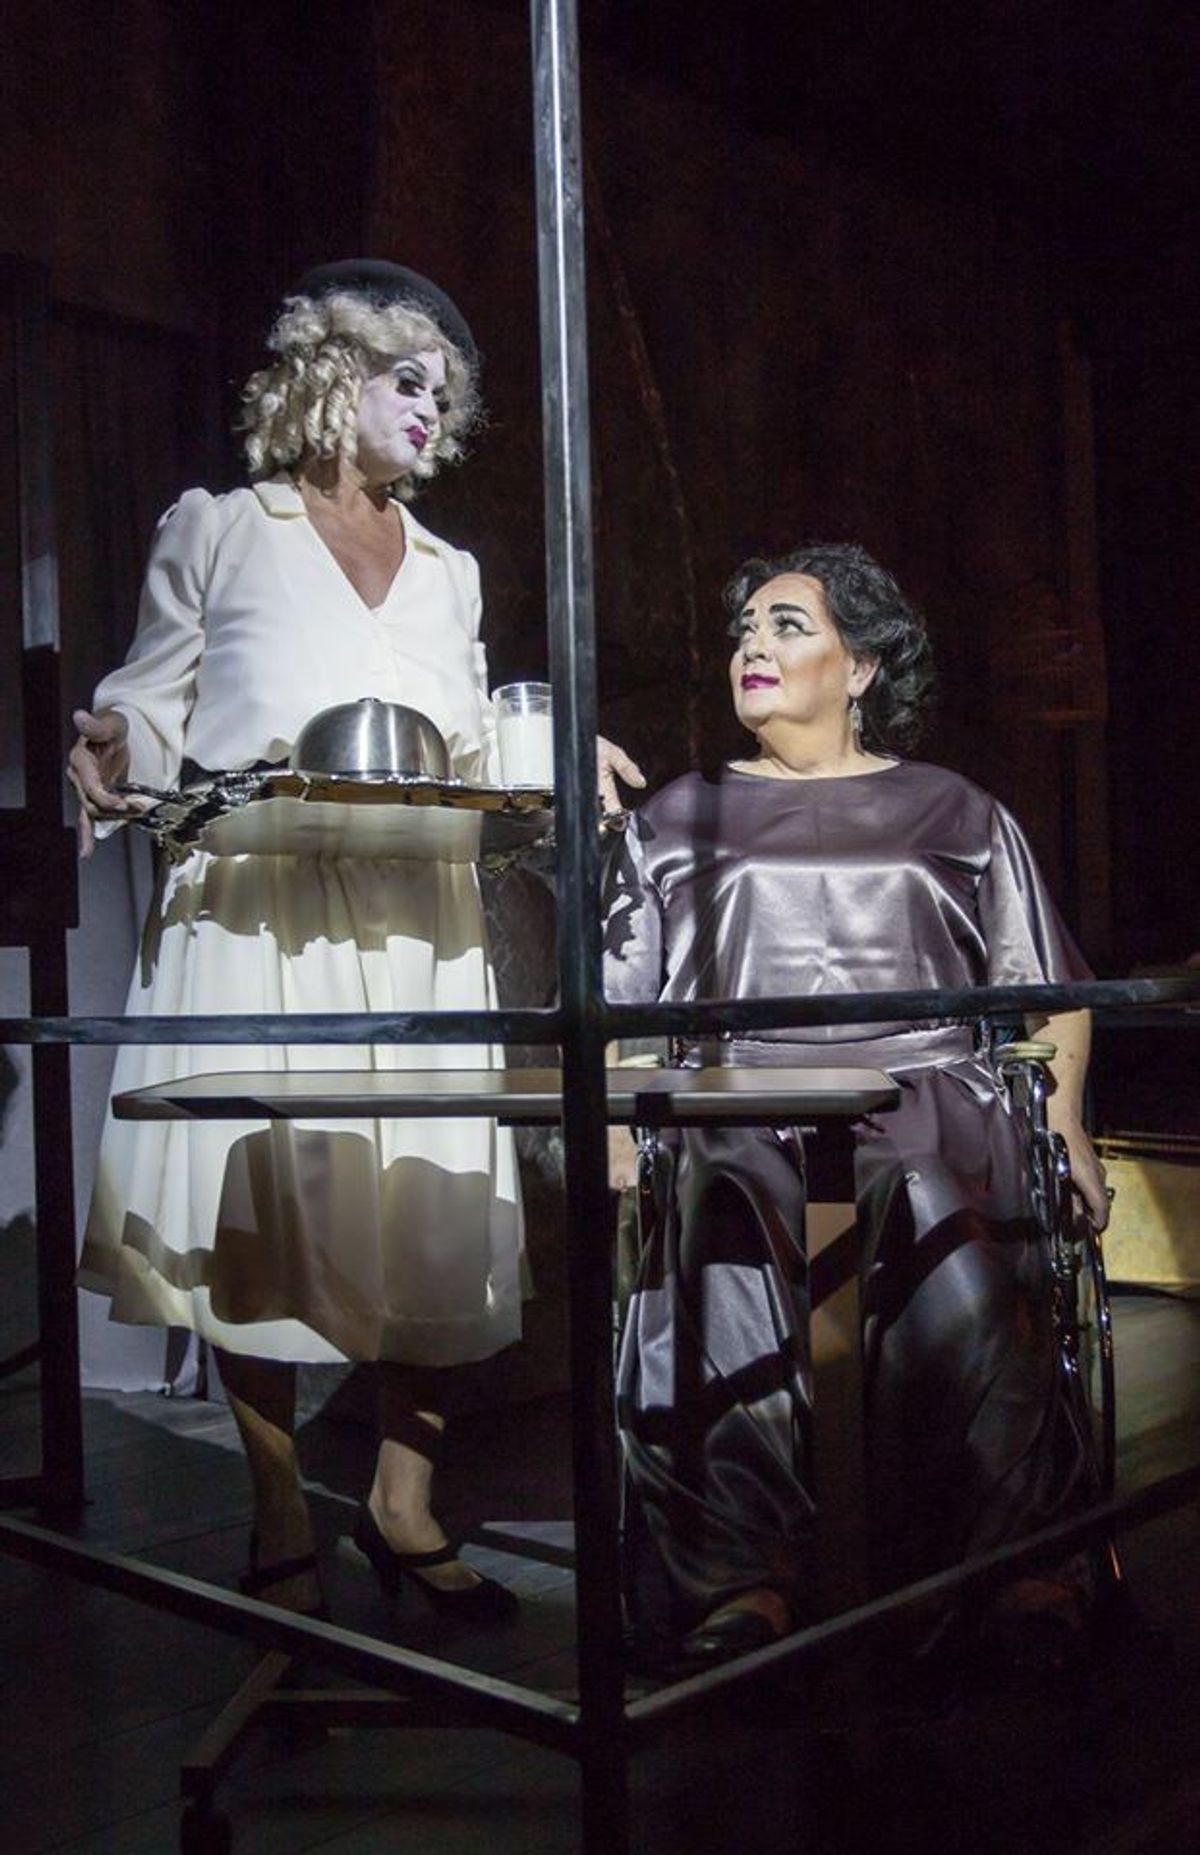 The Hippodrome Theatre Presents "Whatever Happened To Baby Jane"